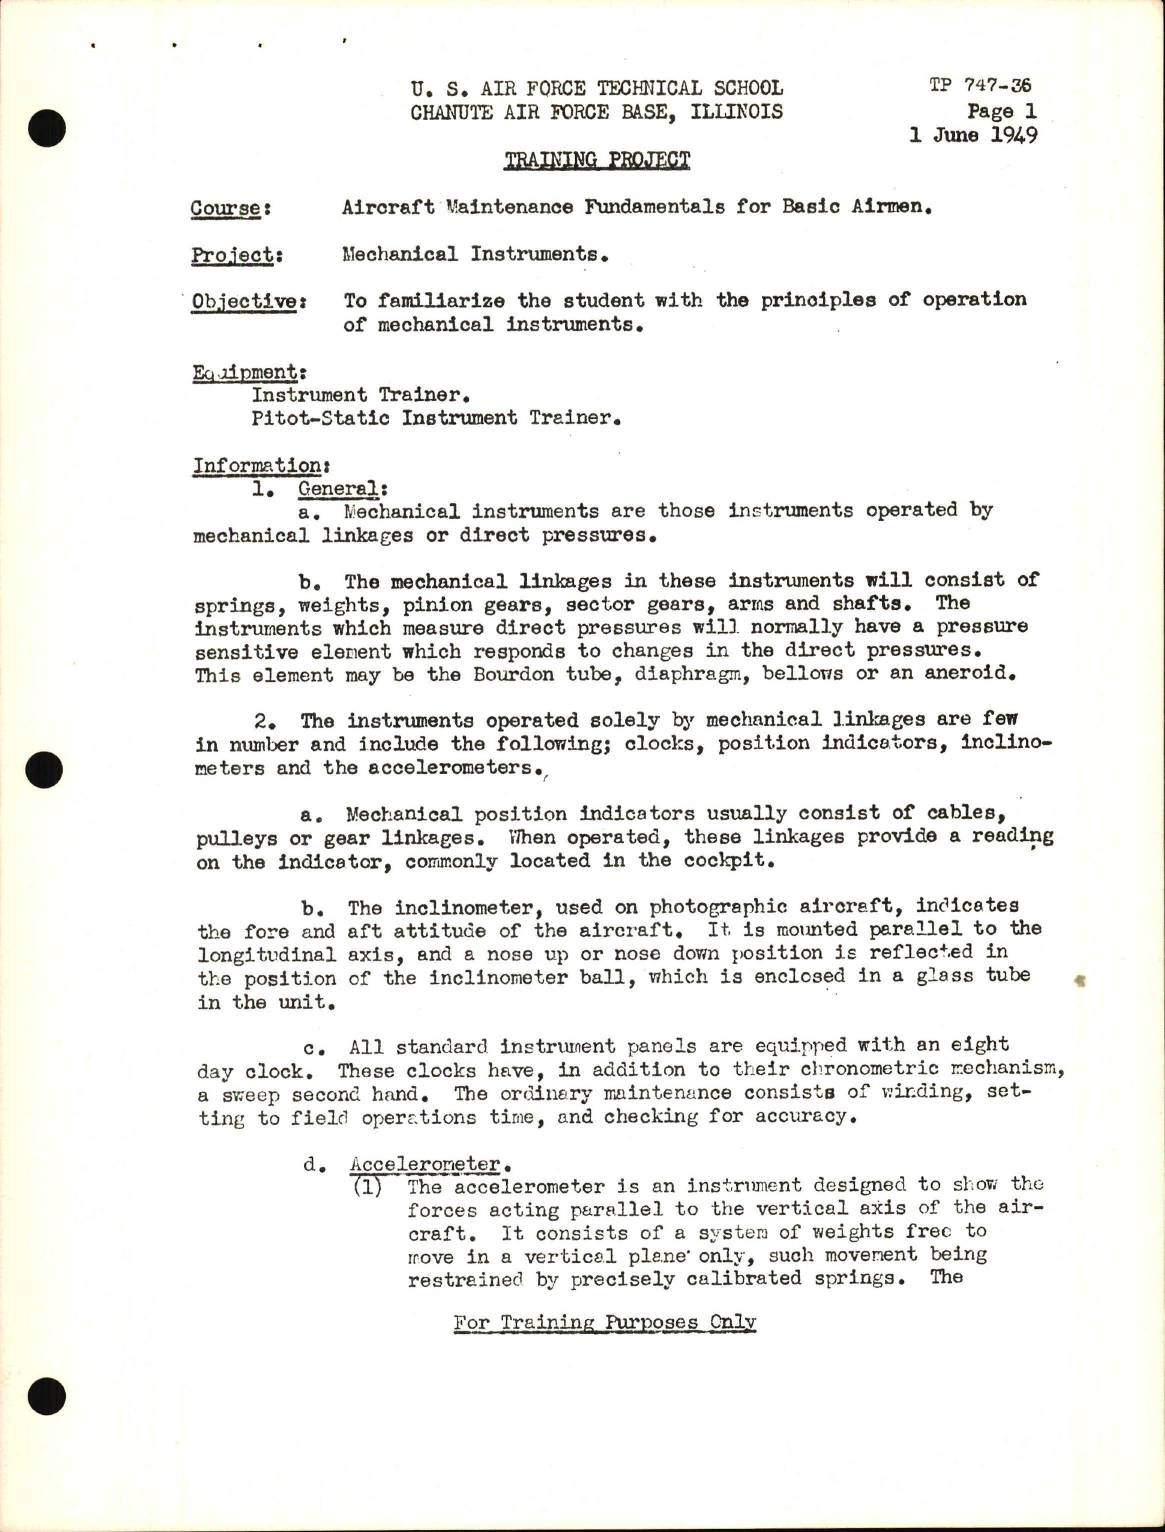 Sample page 1 from AirCorps Library document: Training Project, Mechanical Instruments